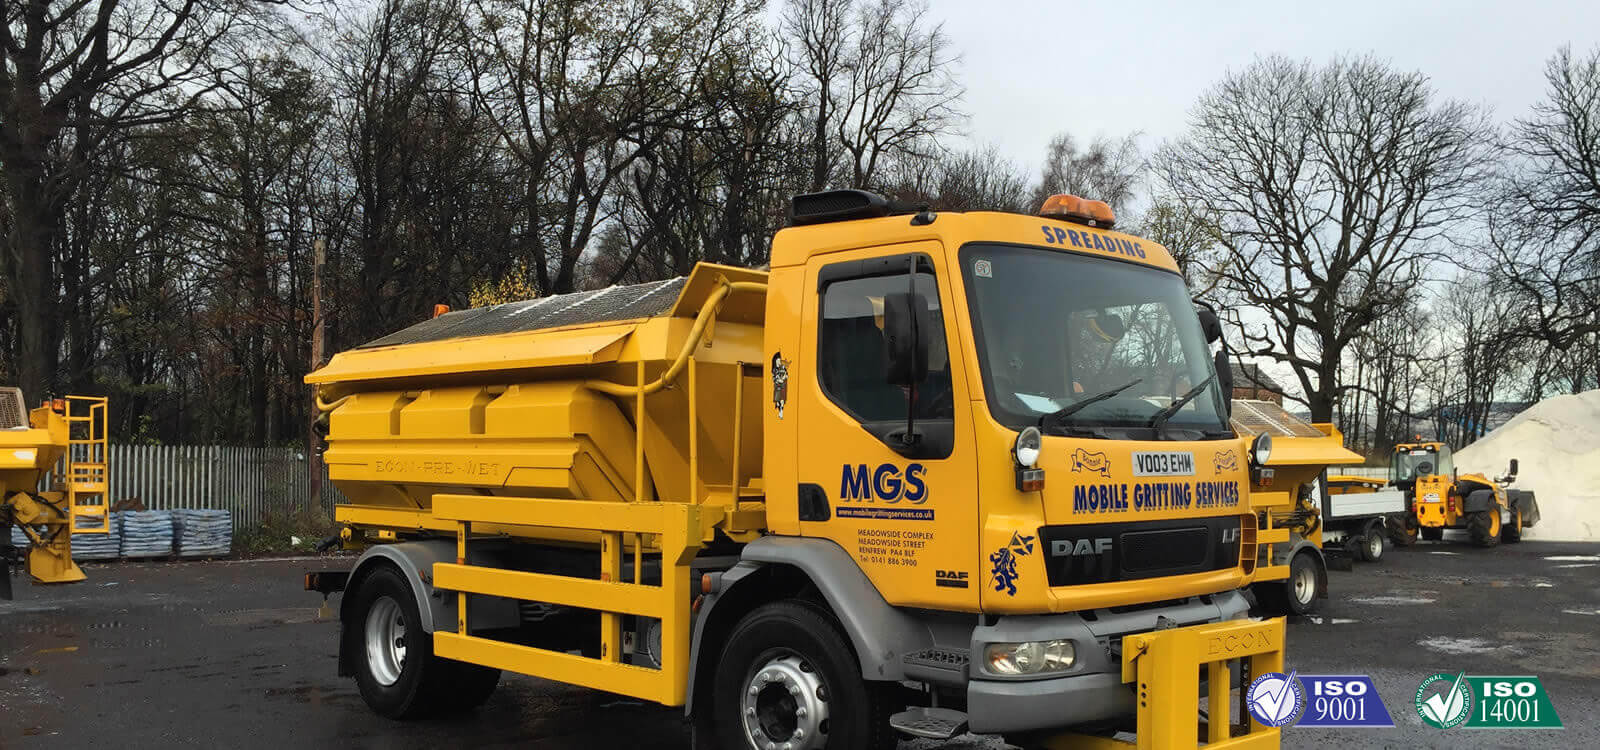 Mobile Gritting Vehicle 